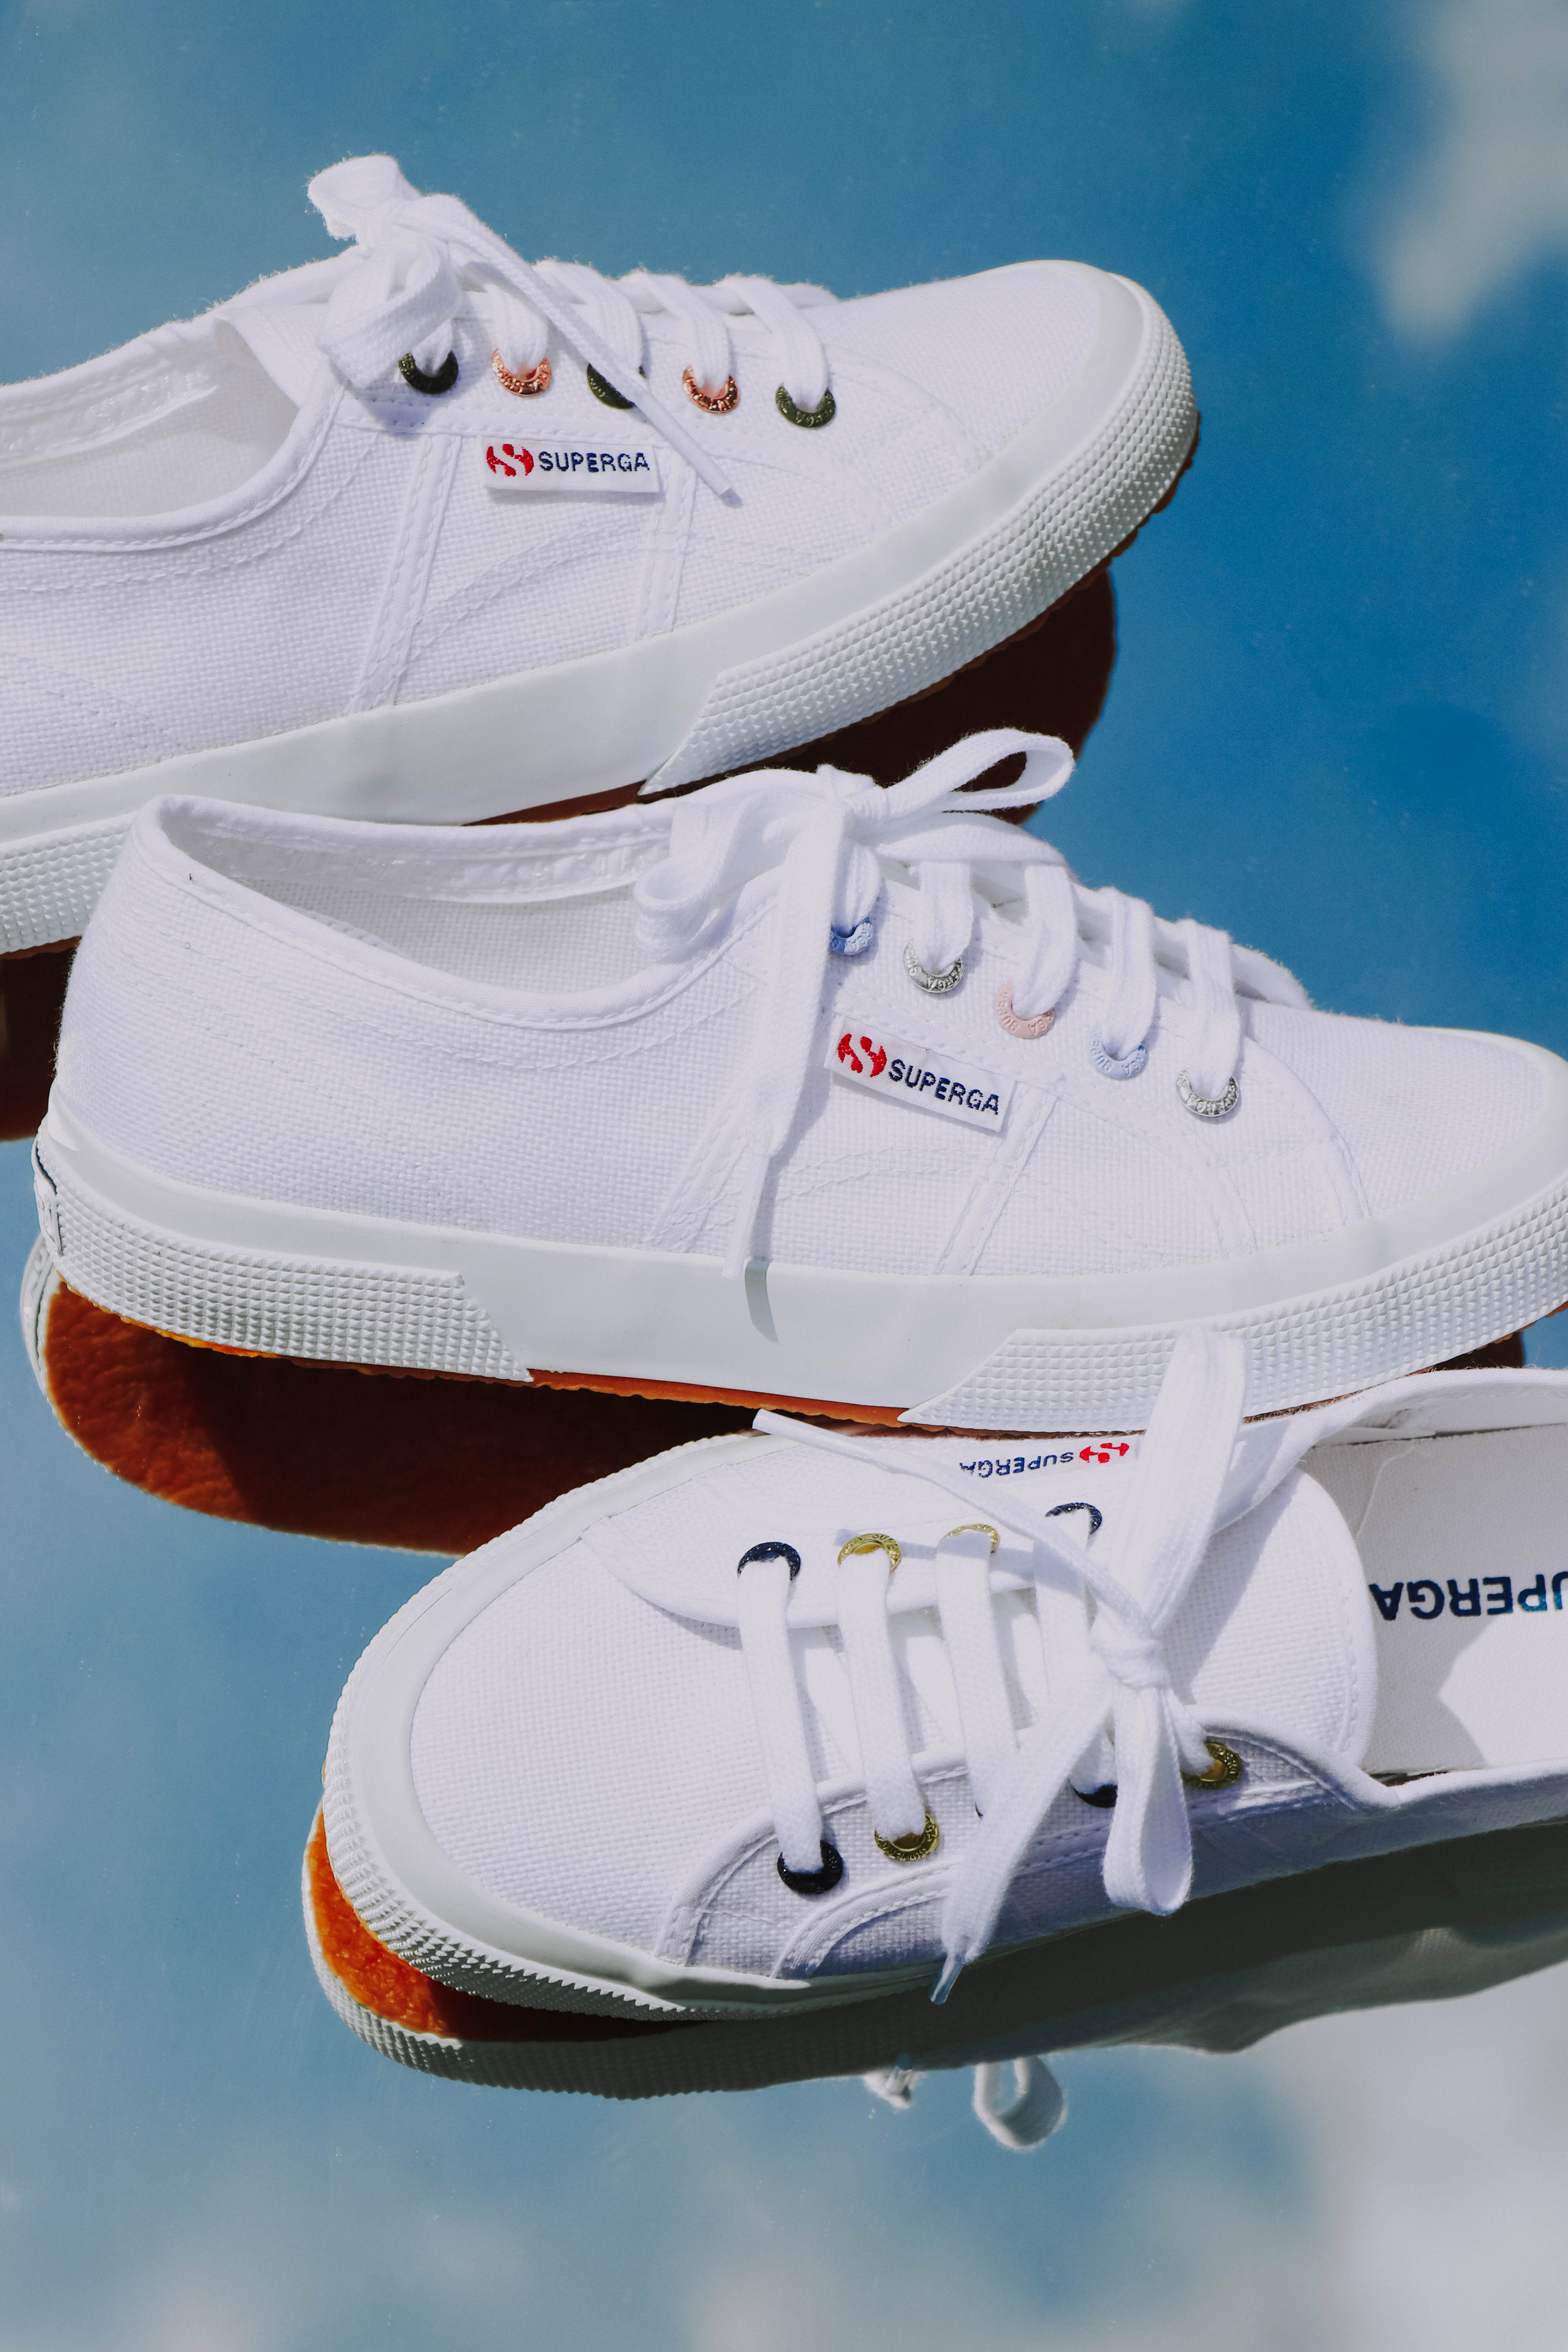 Superga S'pore now lets you customise 